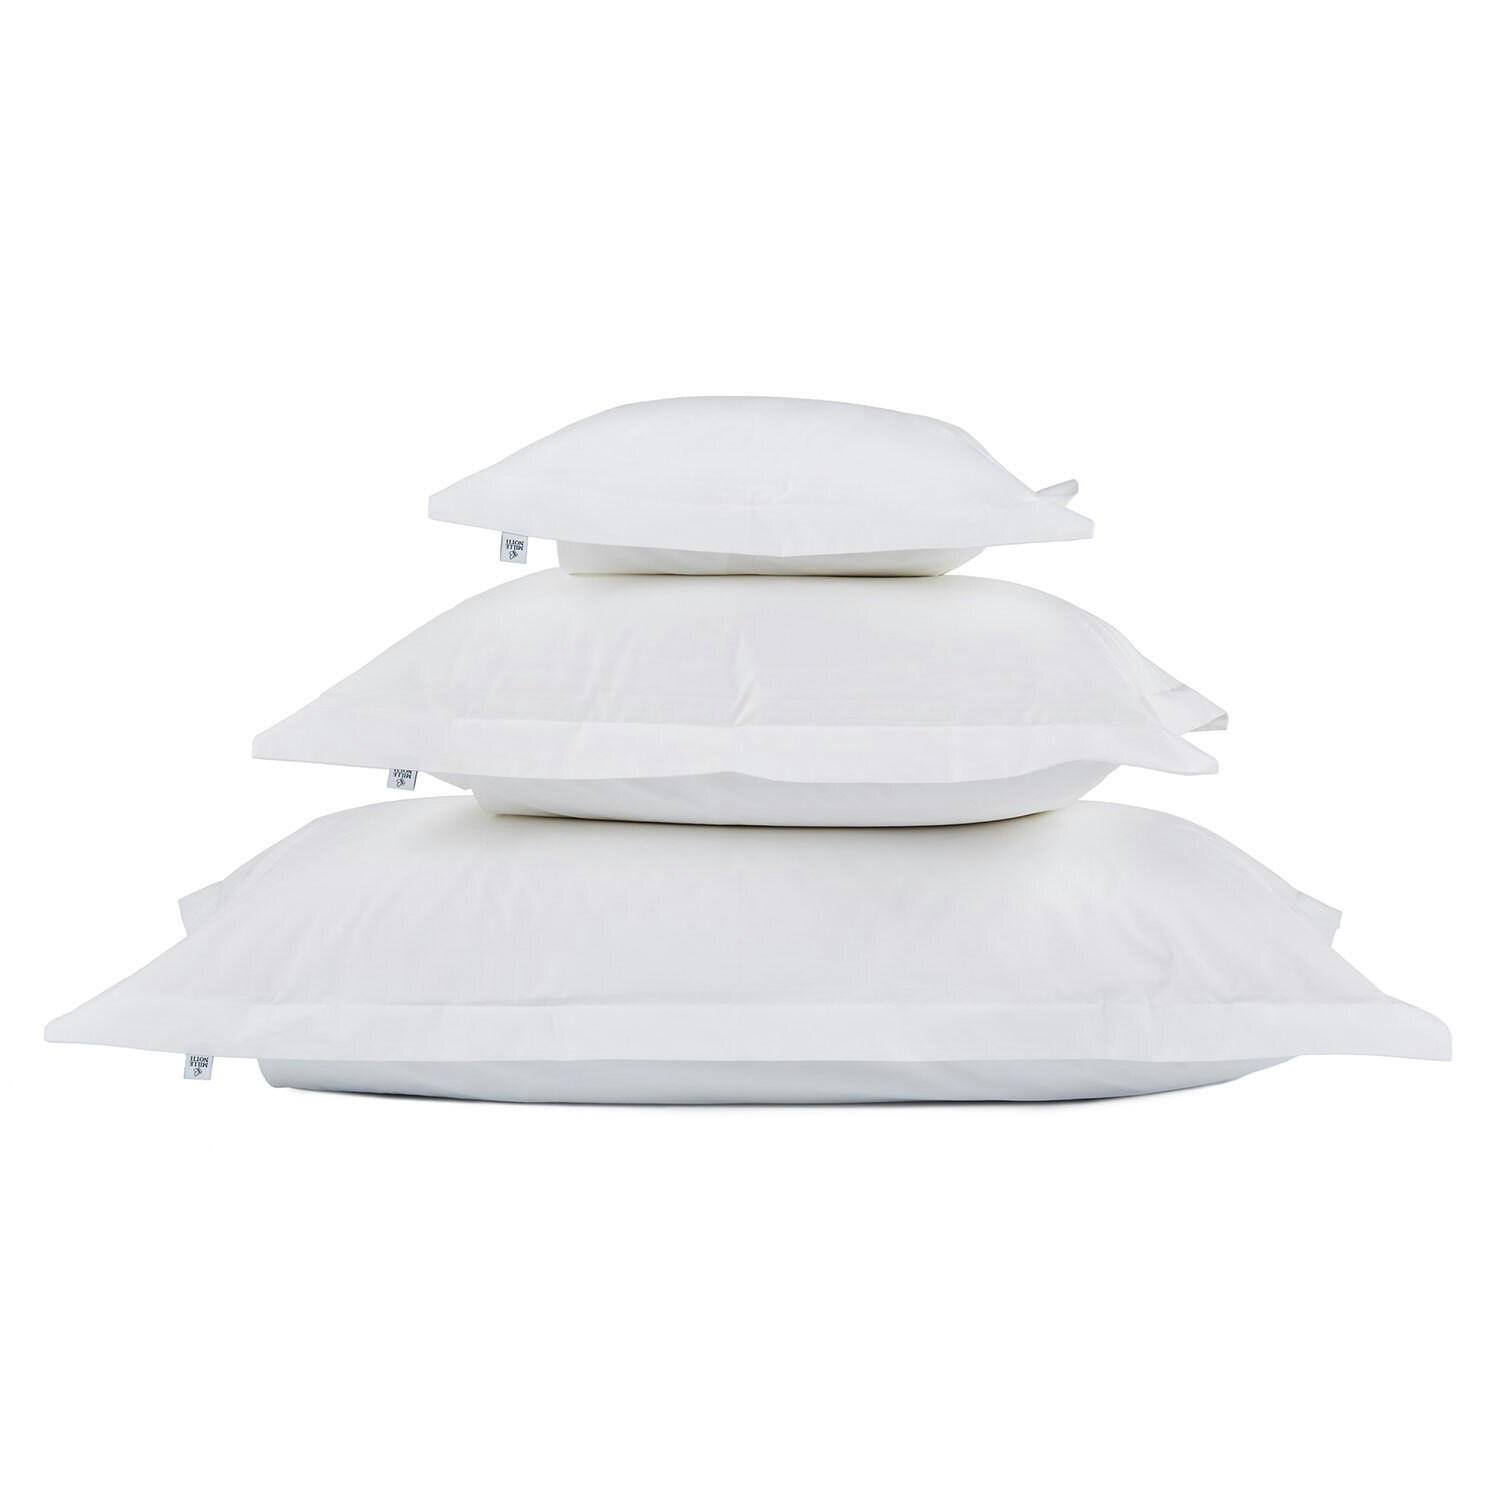 Mille notti percale